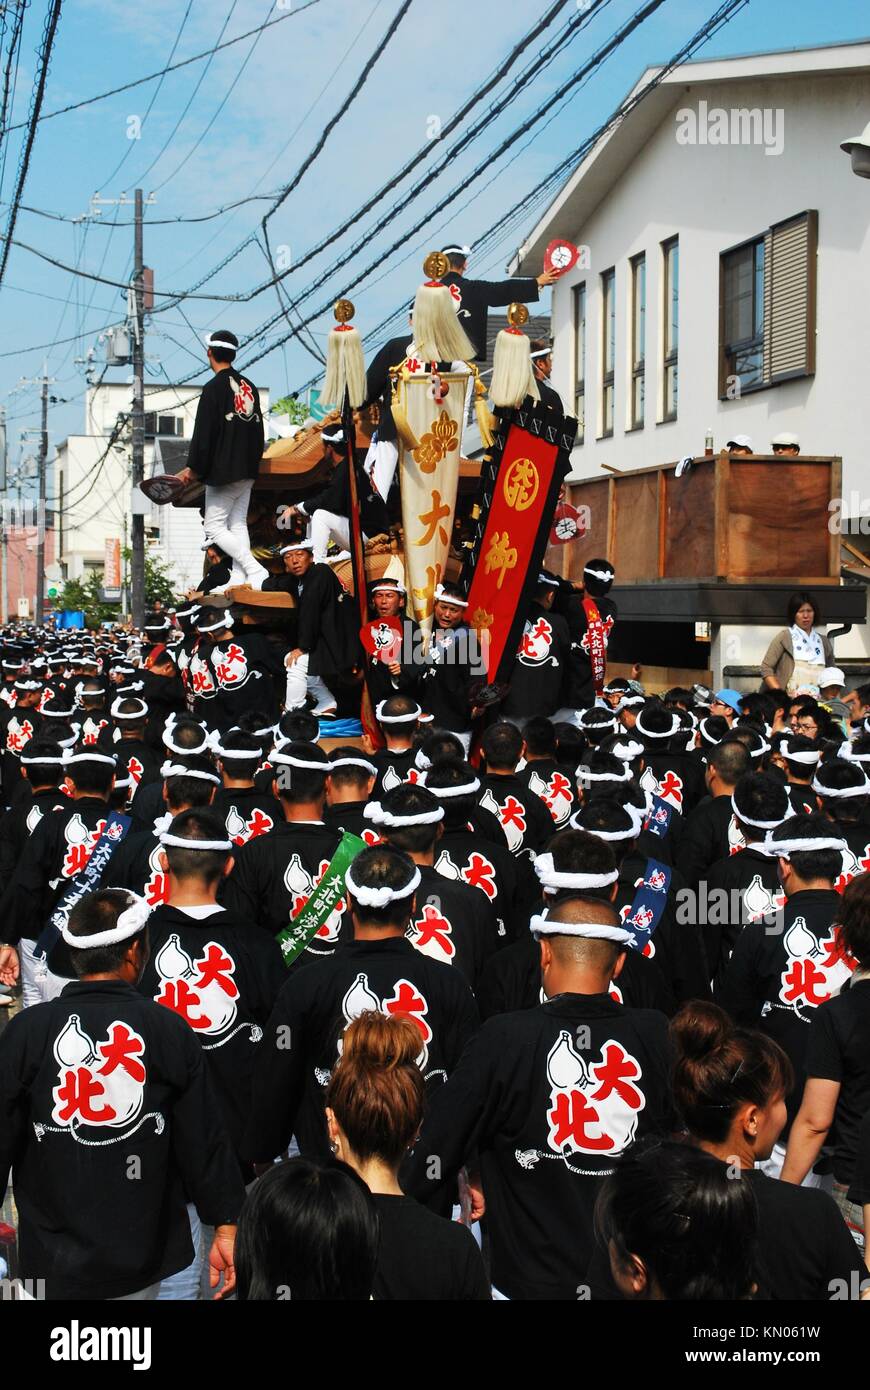 JAPAN - SEP 13: Danjiri festival held on Sept 13, 2008 in Kishiwada ward, Osaka, Japan. In this event, huge and heavy floats are supported by a team o Stock Photo